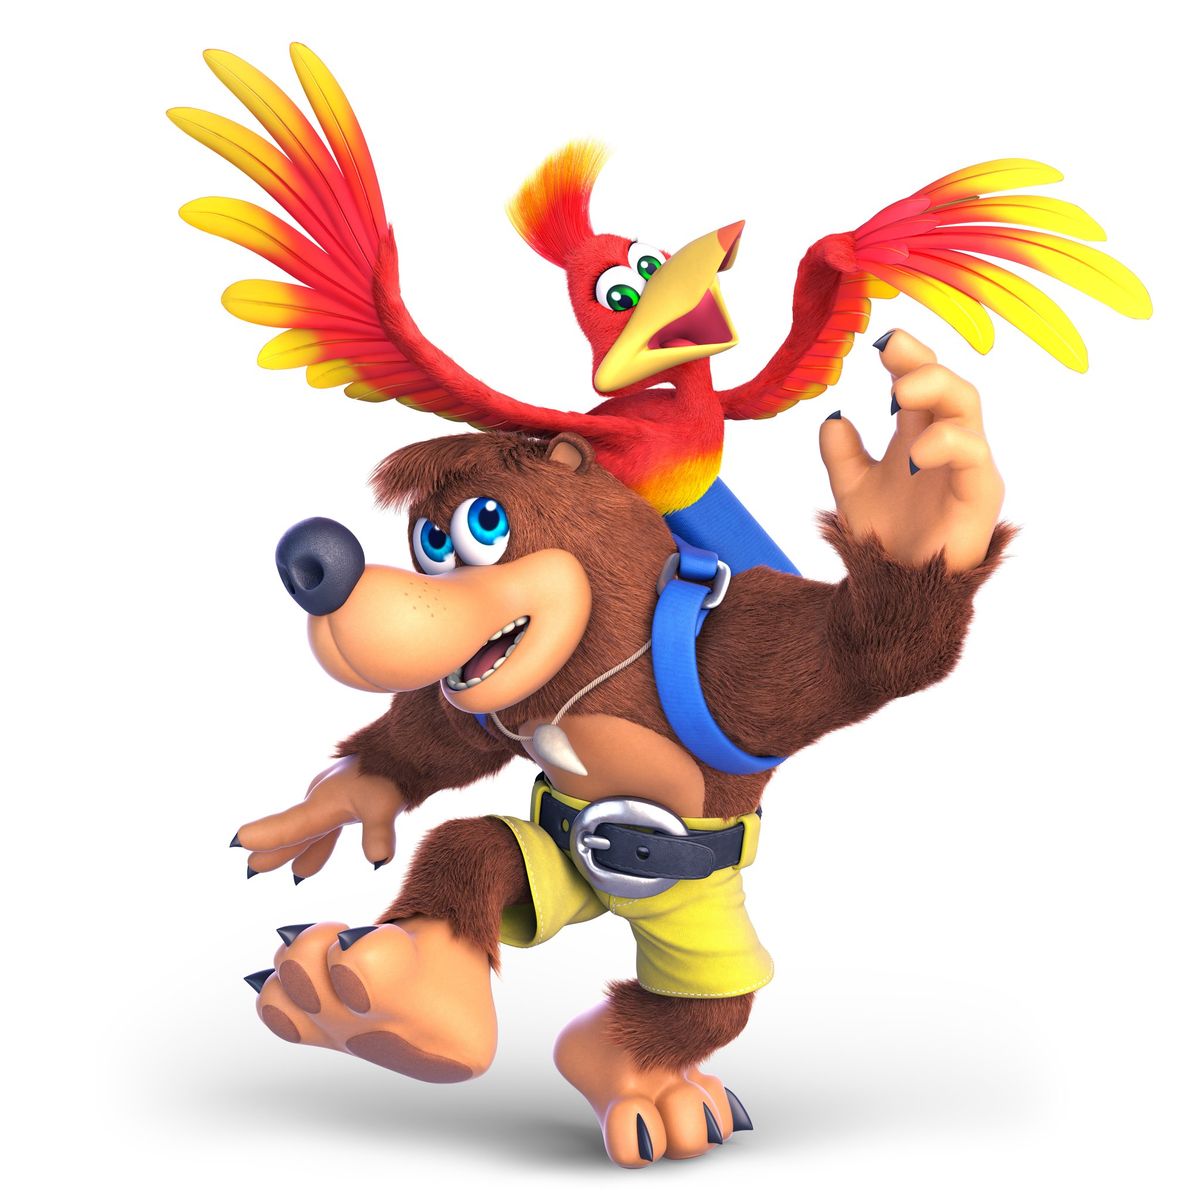 How to counter Banjo And Kazooie with Ryu in Super Smash Bros. Ultimate